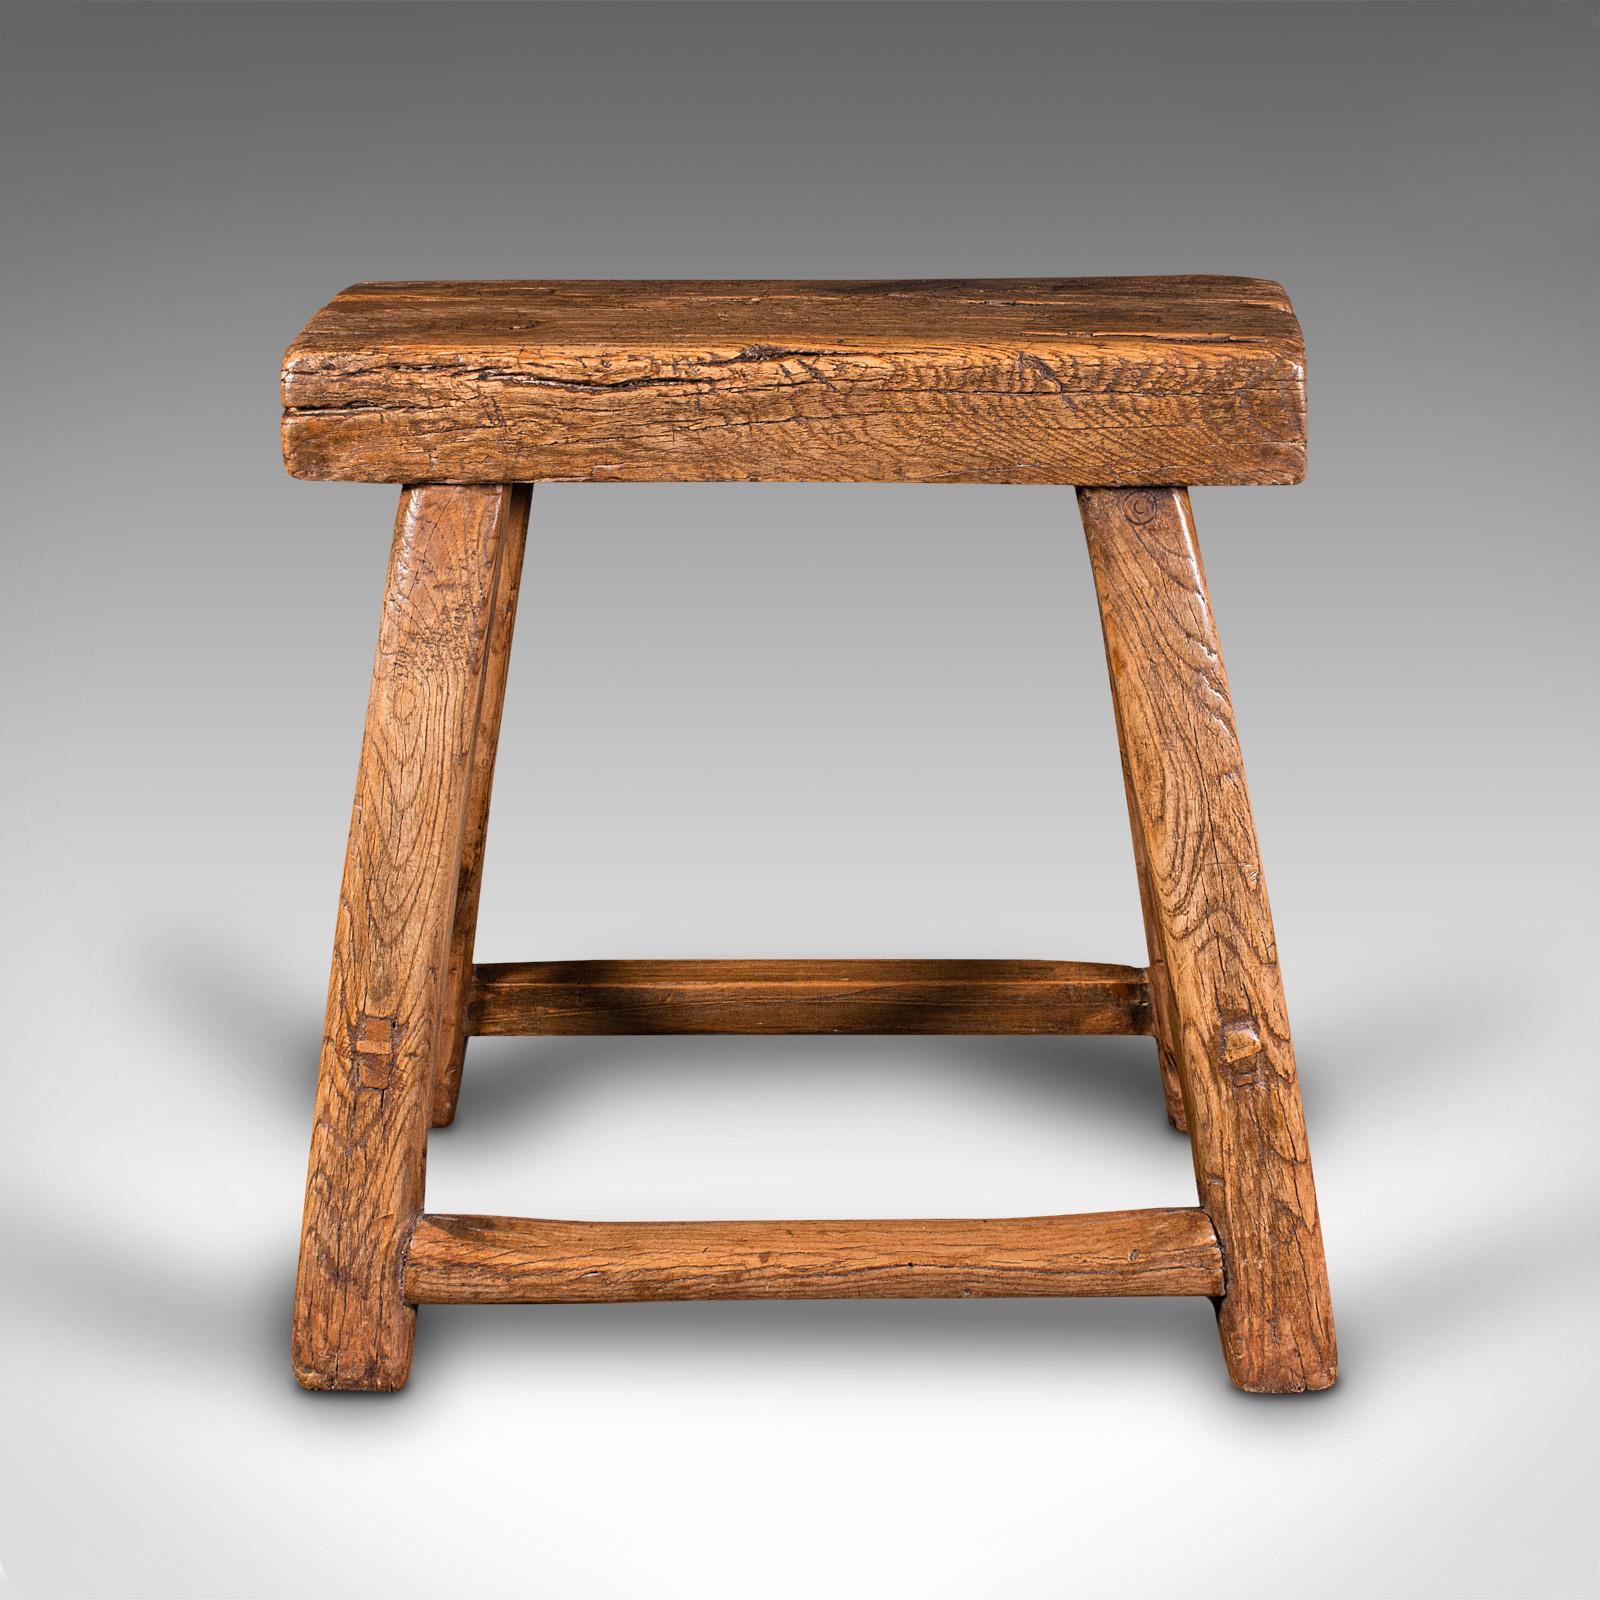 This is a small antique craftsman's stool. An English, rustic oak work seat in Provincial taste, dating to the Georgian period, circa 1800.

Graced with an abundance of rustic charm and character
Displays a desirable aged patina in original